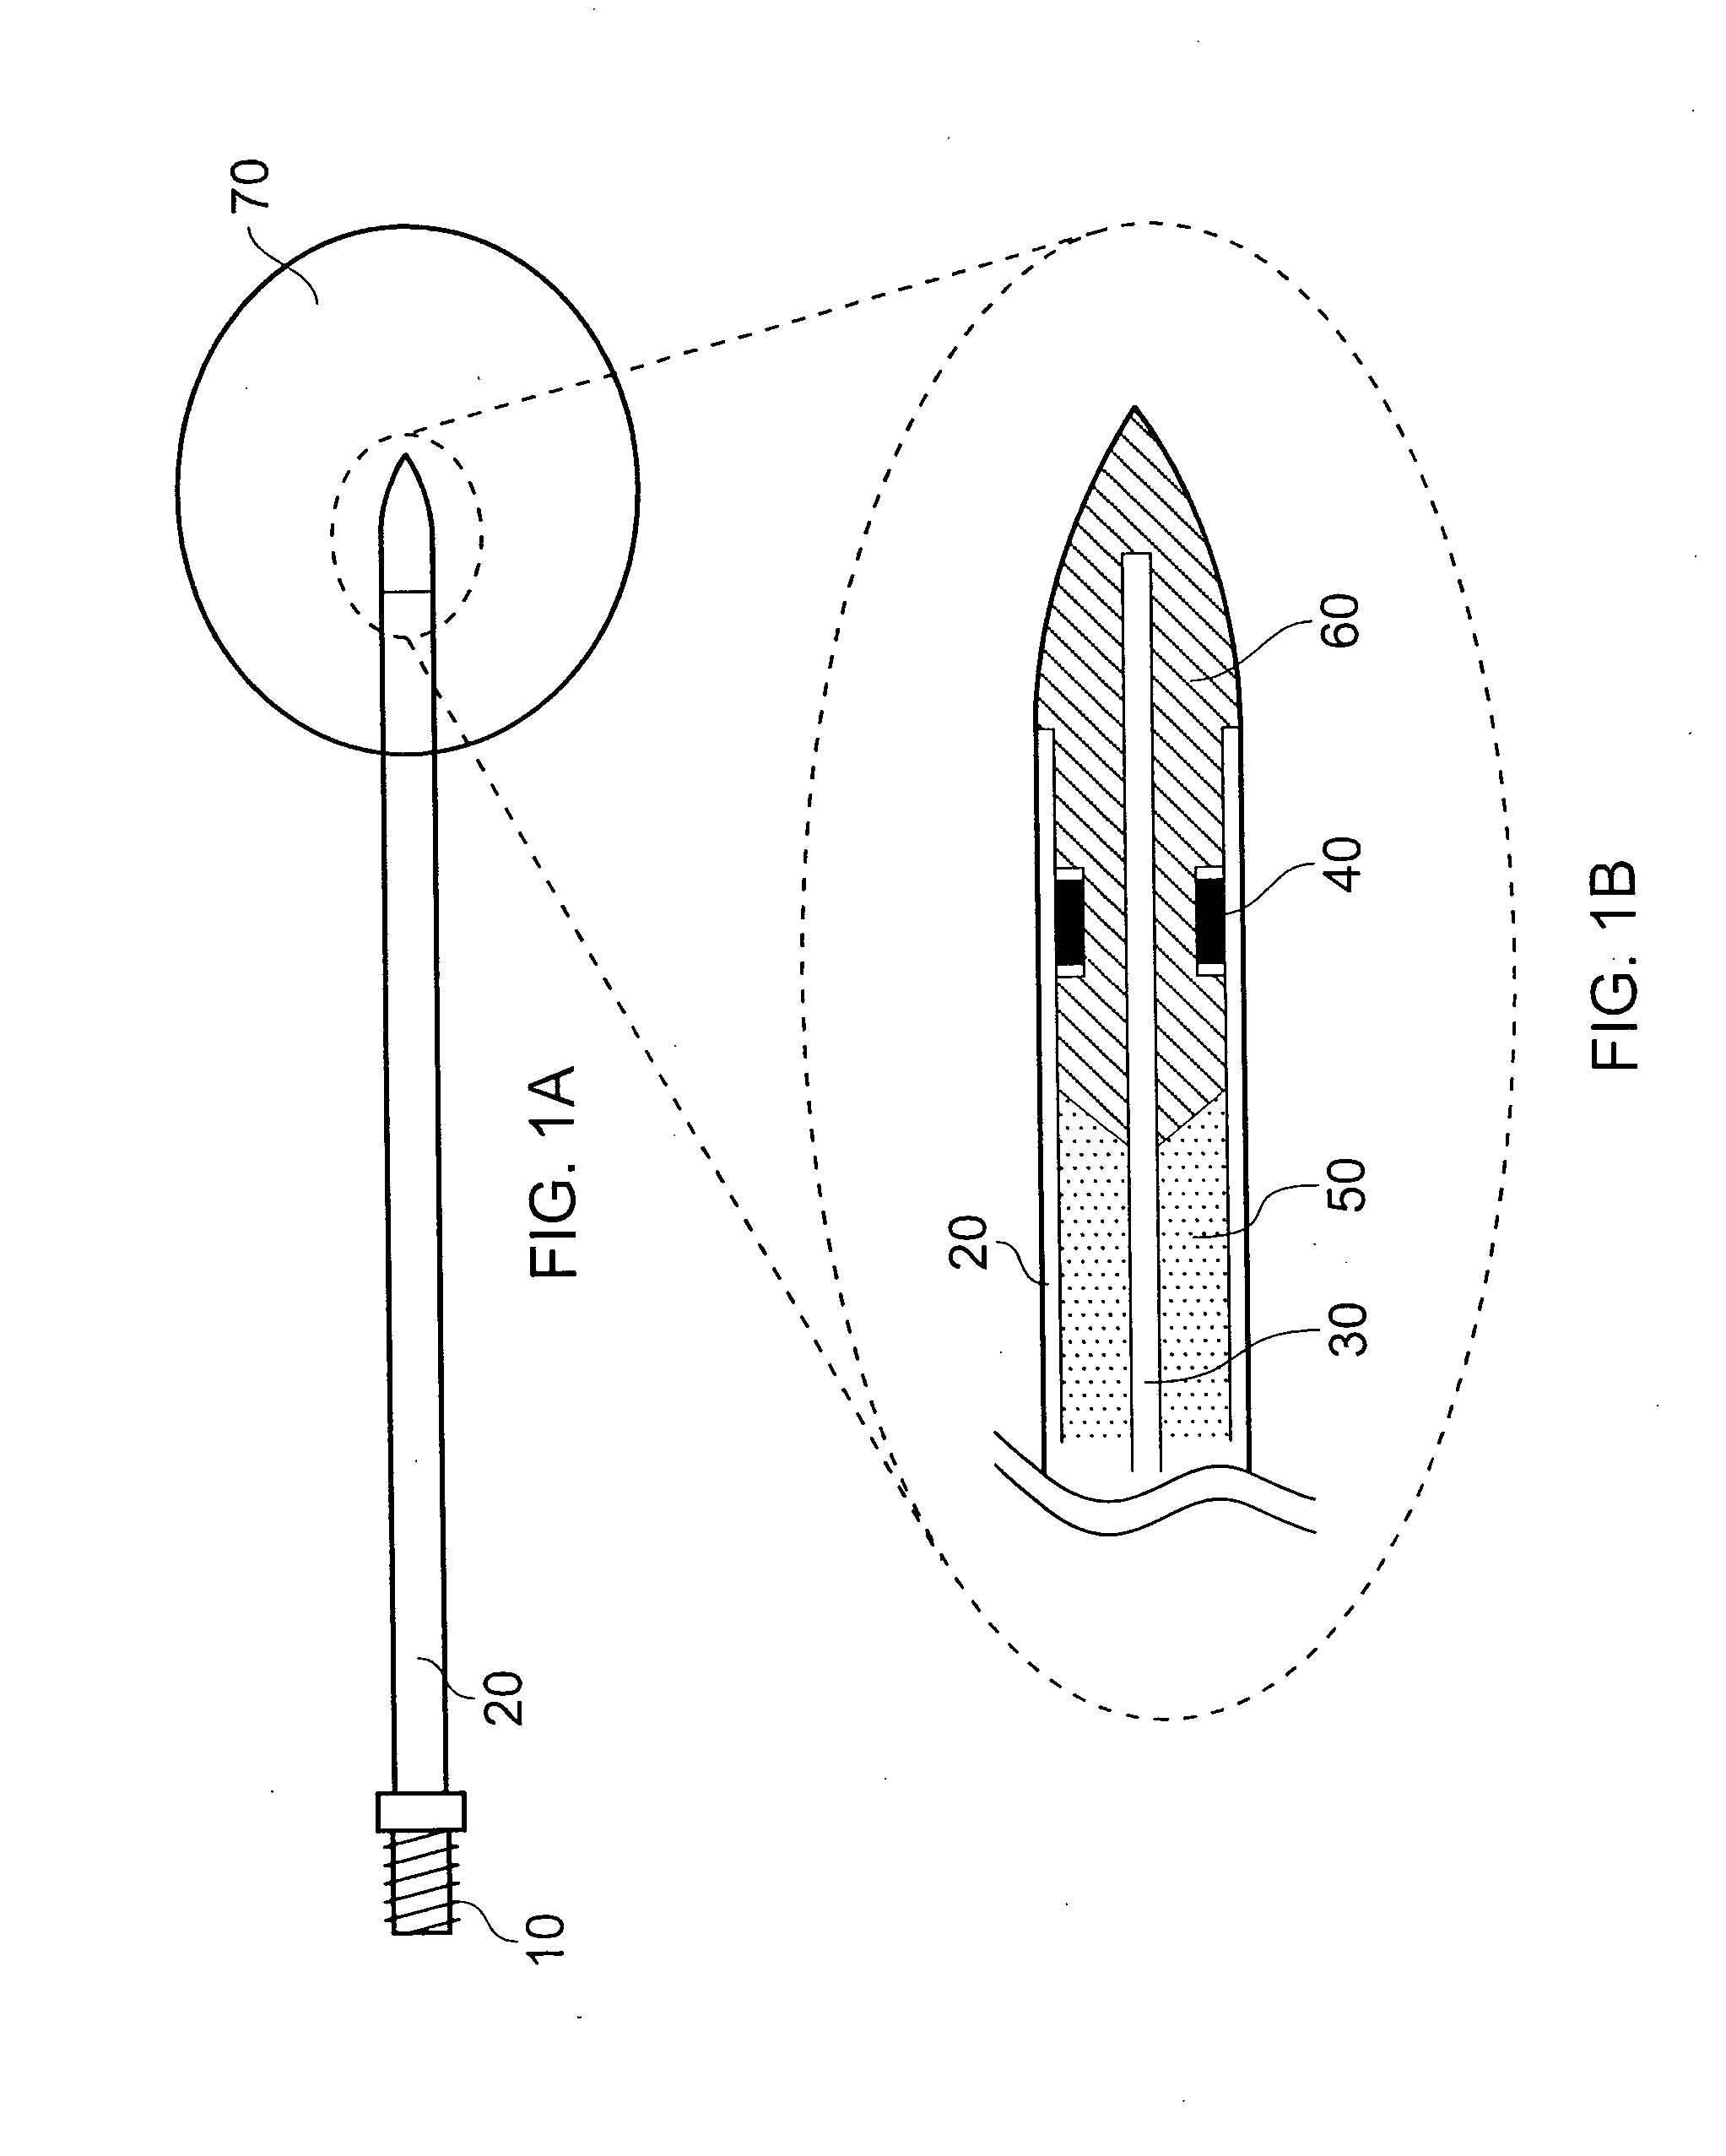 Tissue measurement and ablation antenna